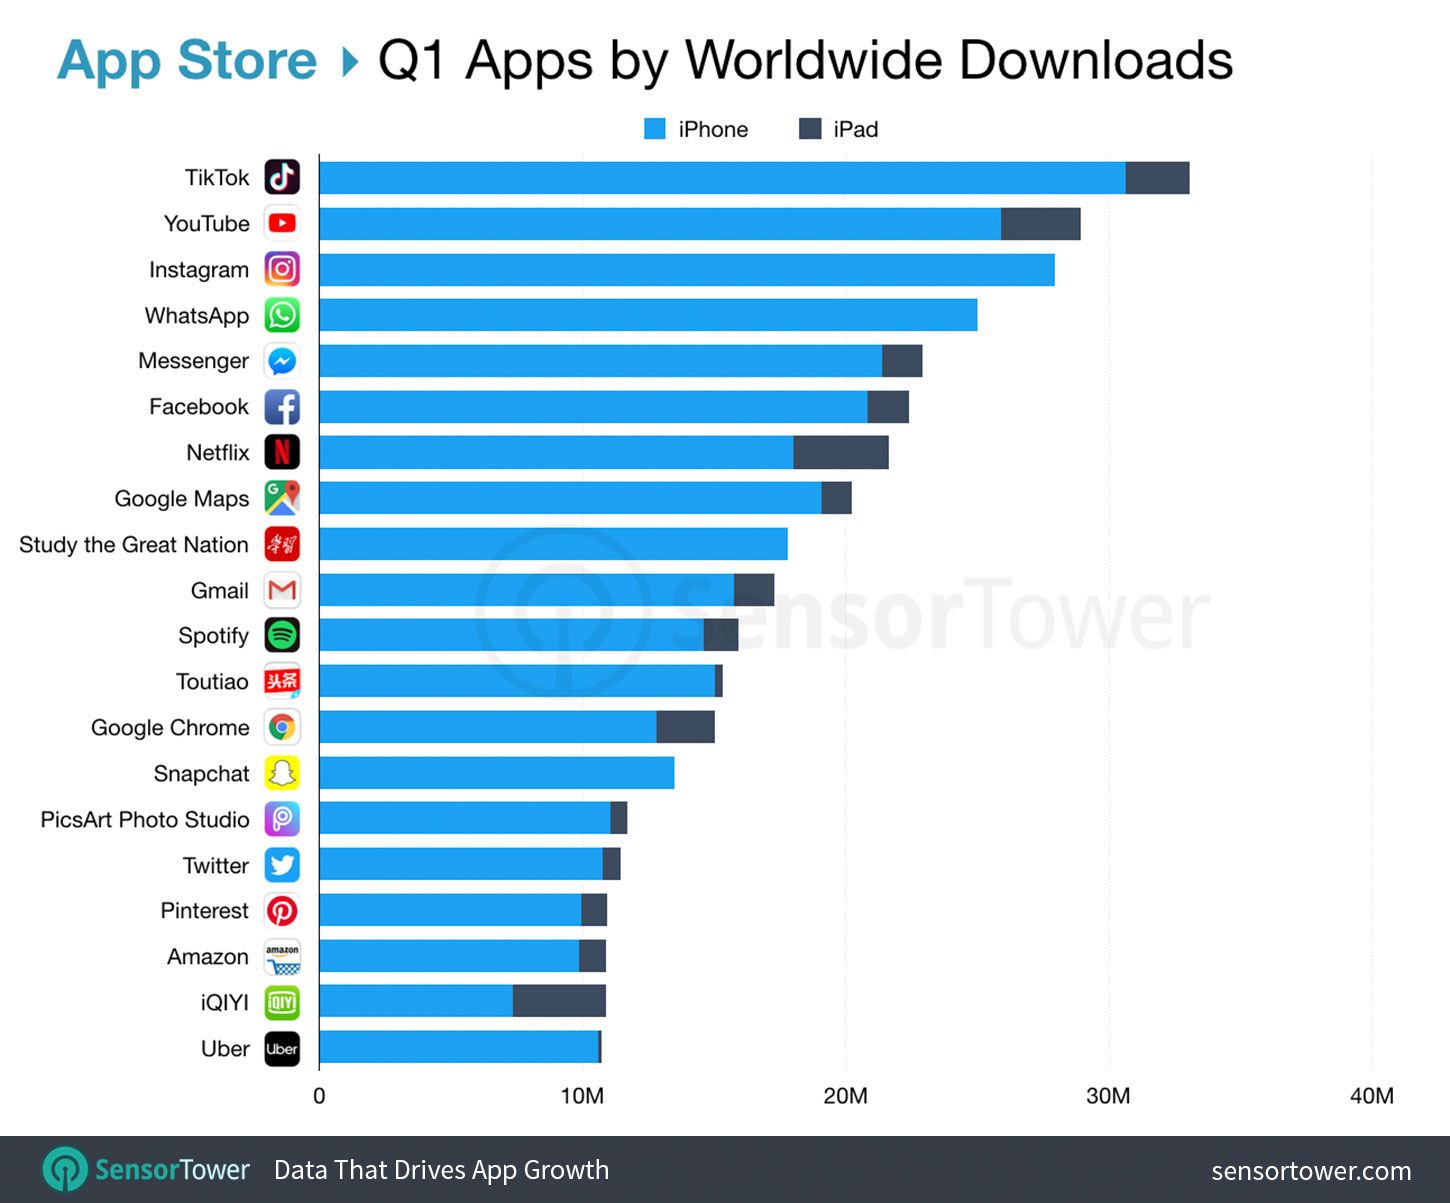 These Are the Top iPhone and Android Apps in Q1 2019